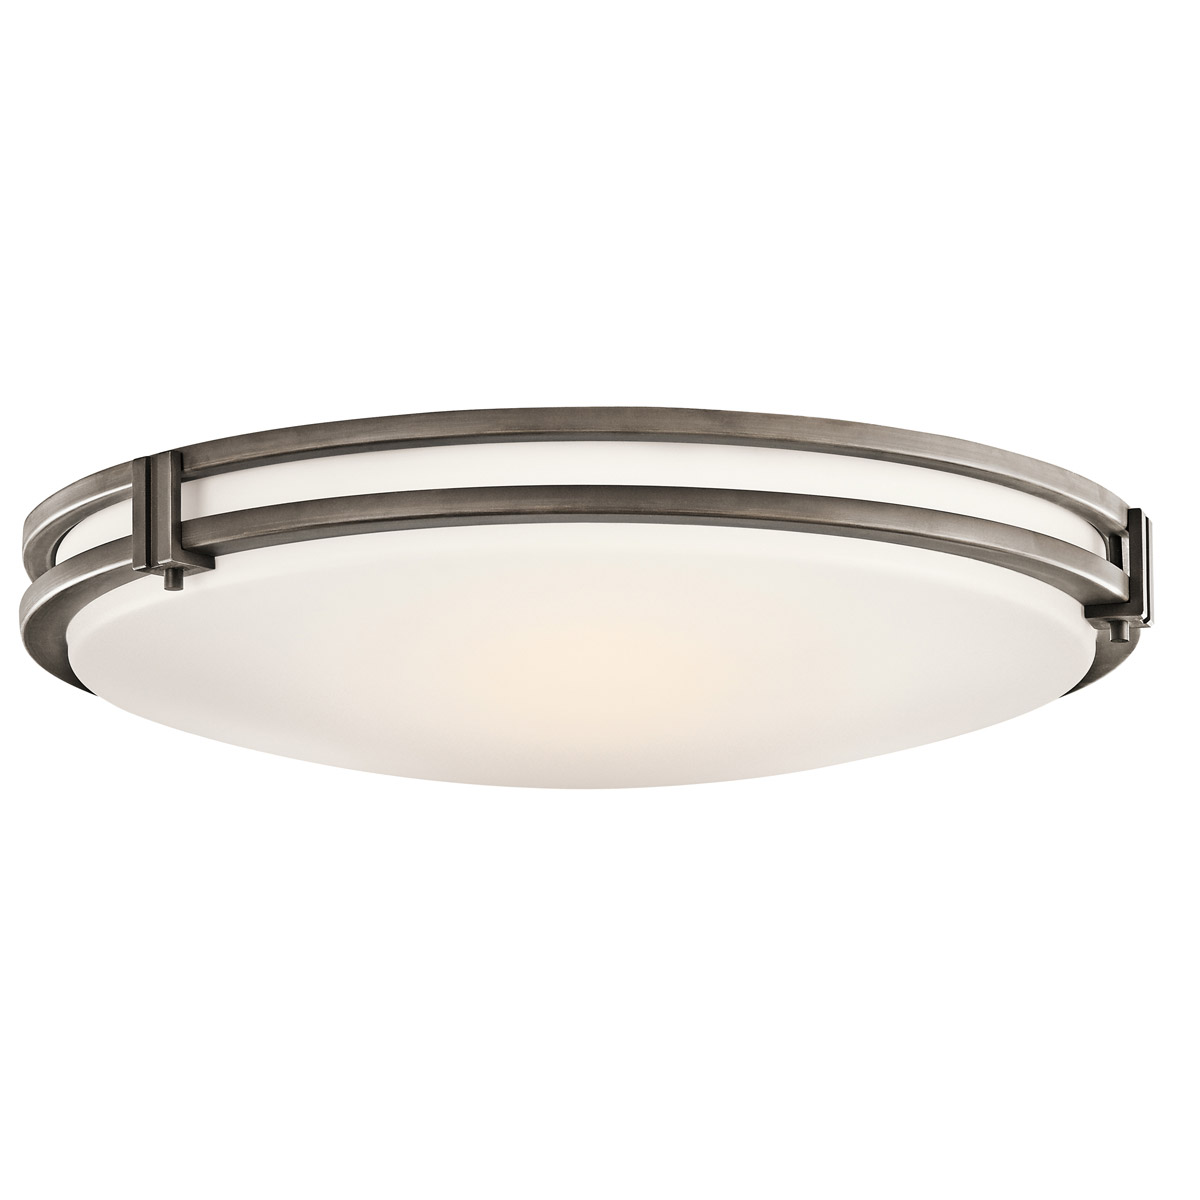 mounted ceiling lights photo - 3